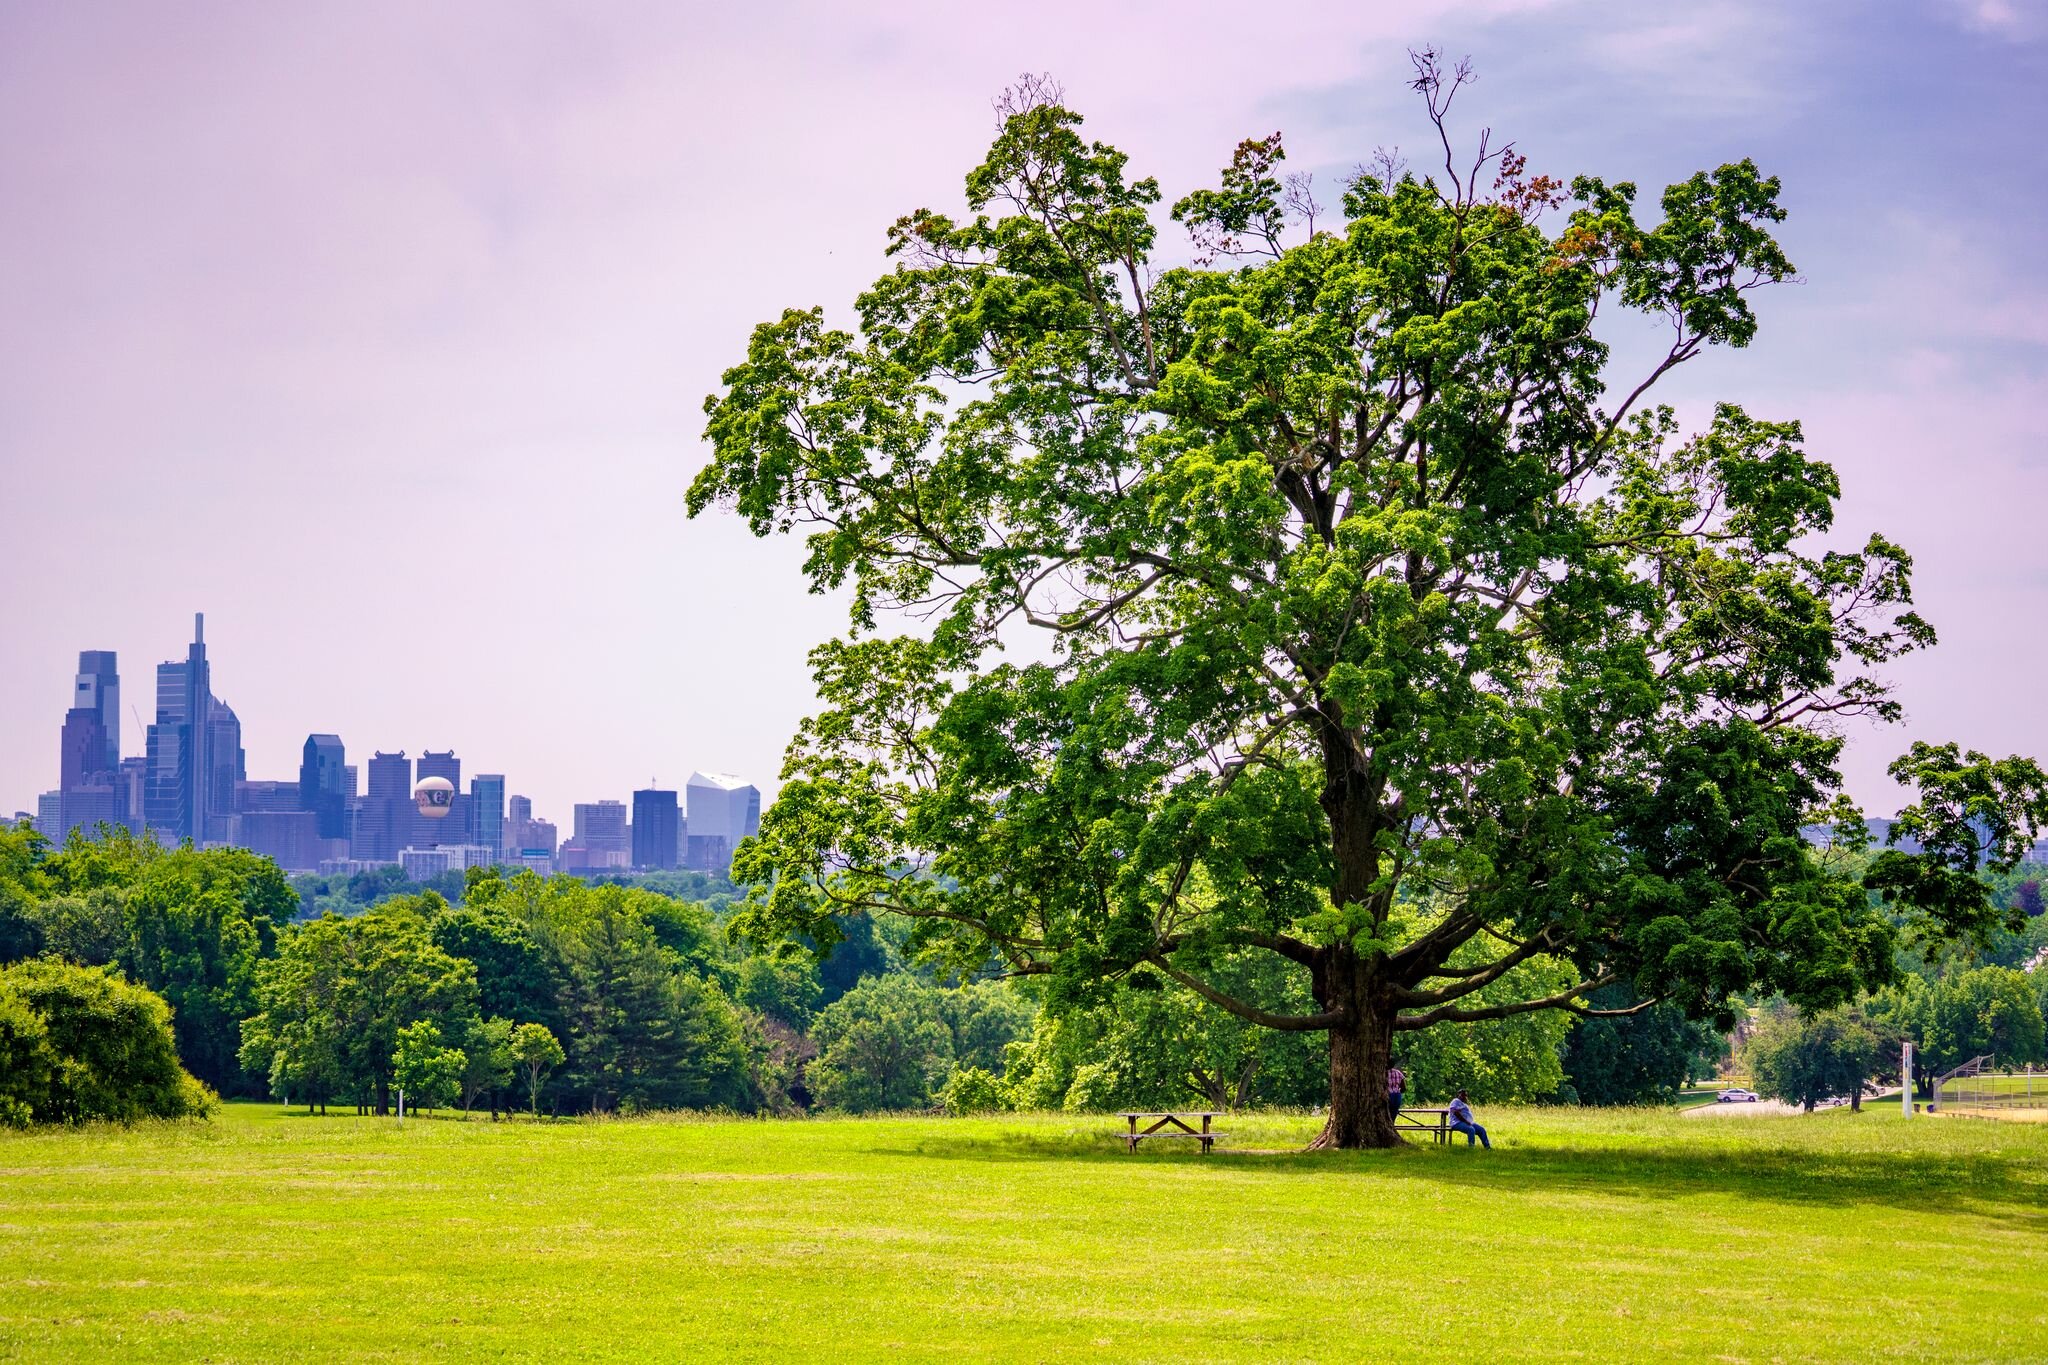 Fairmount Park with the skyline in the distance. Photography by Rachael Warriner.